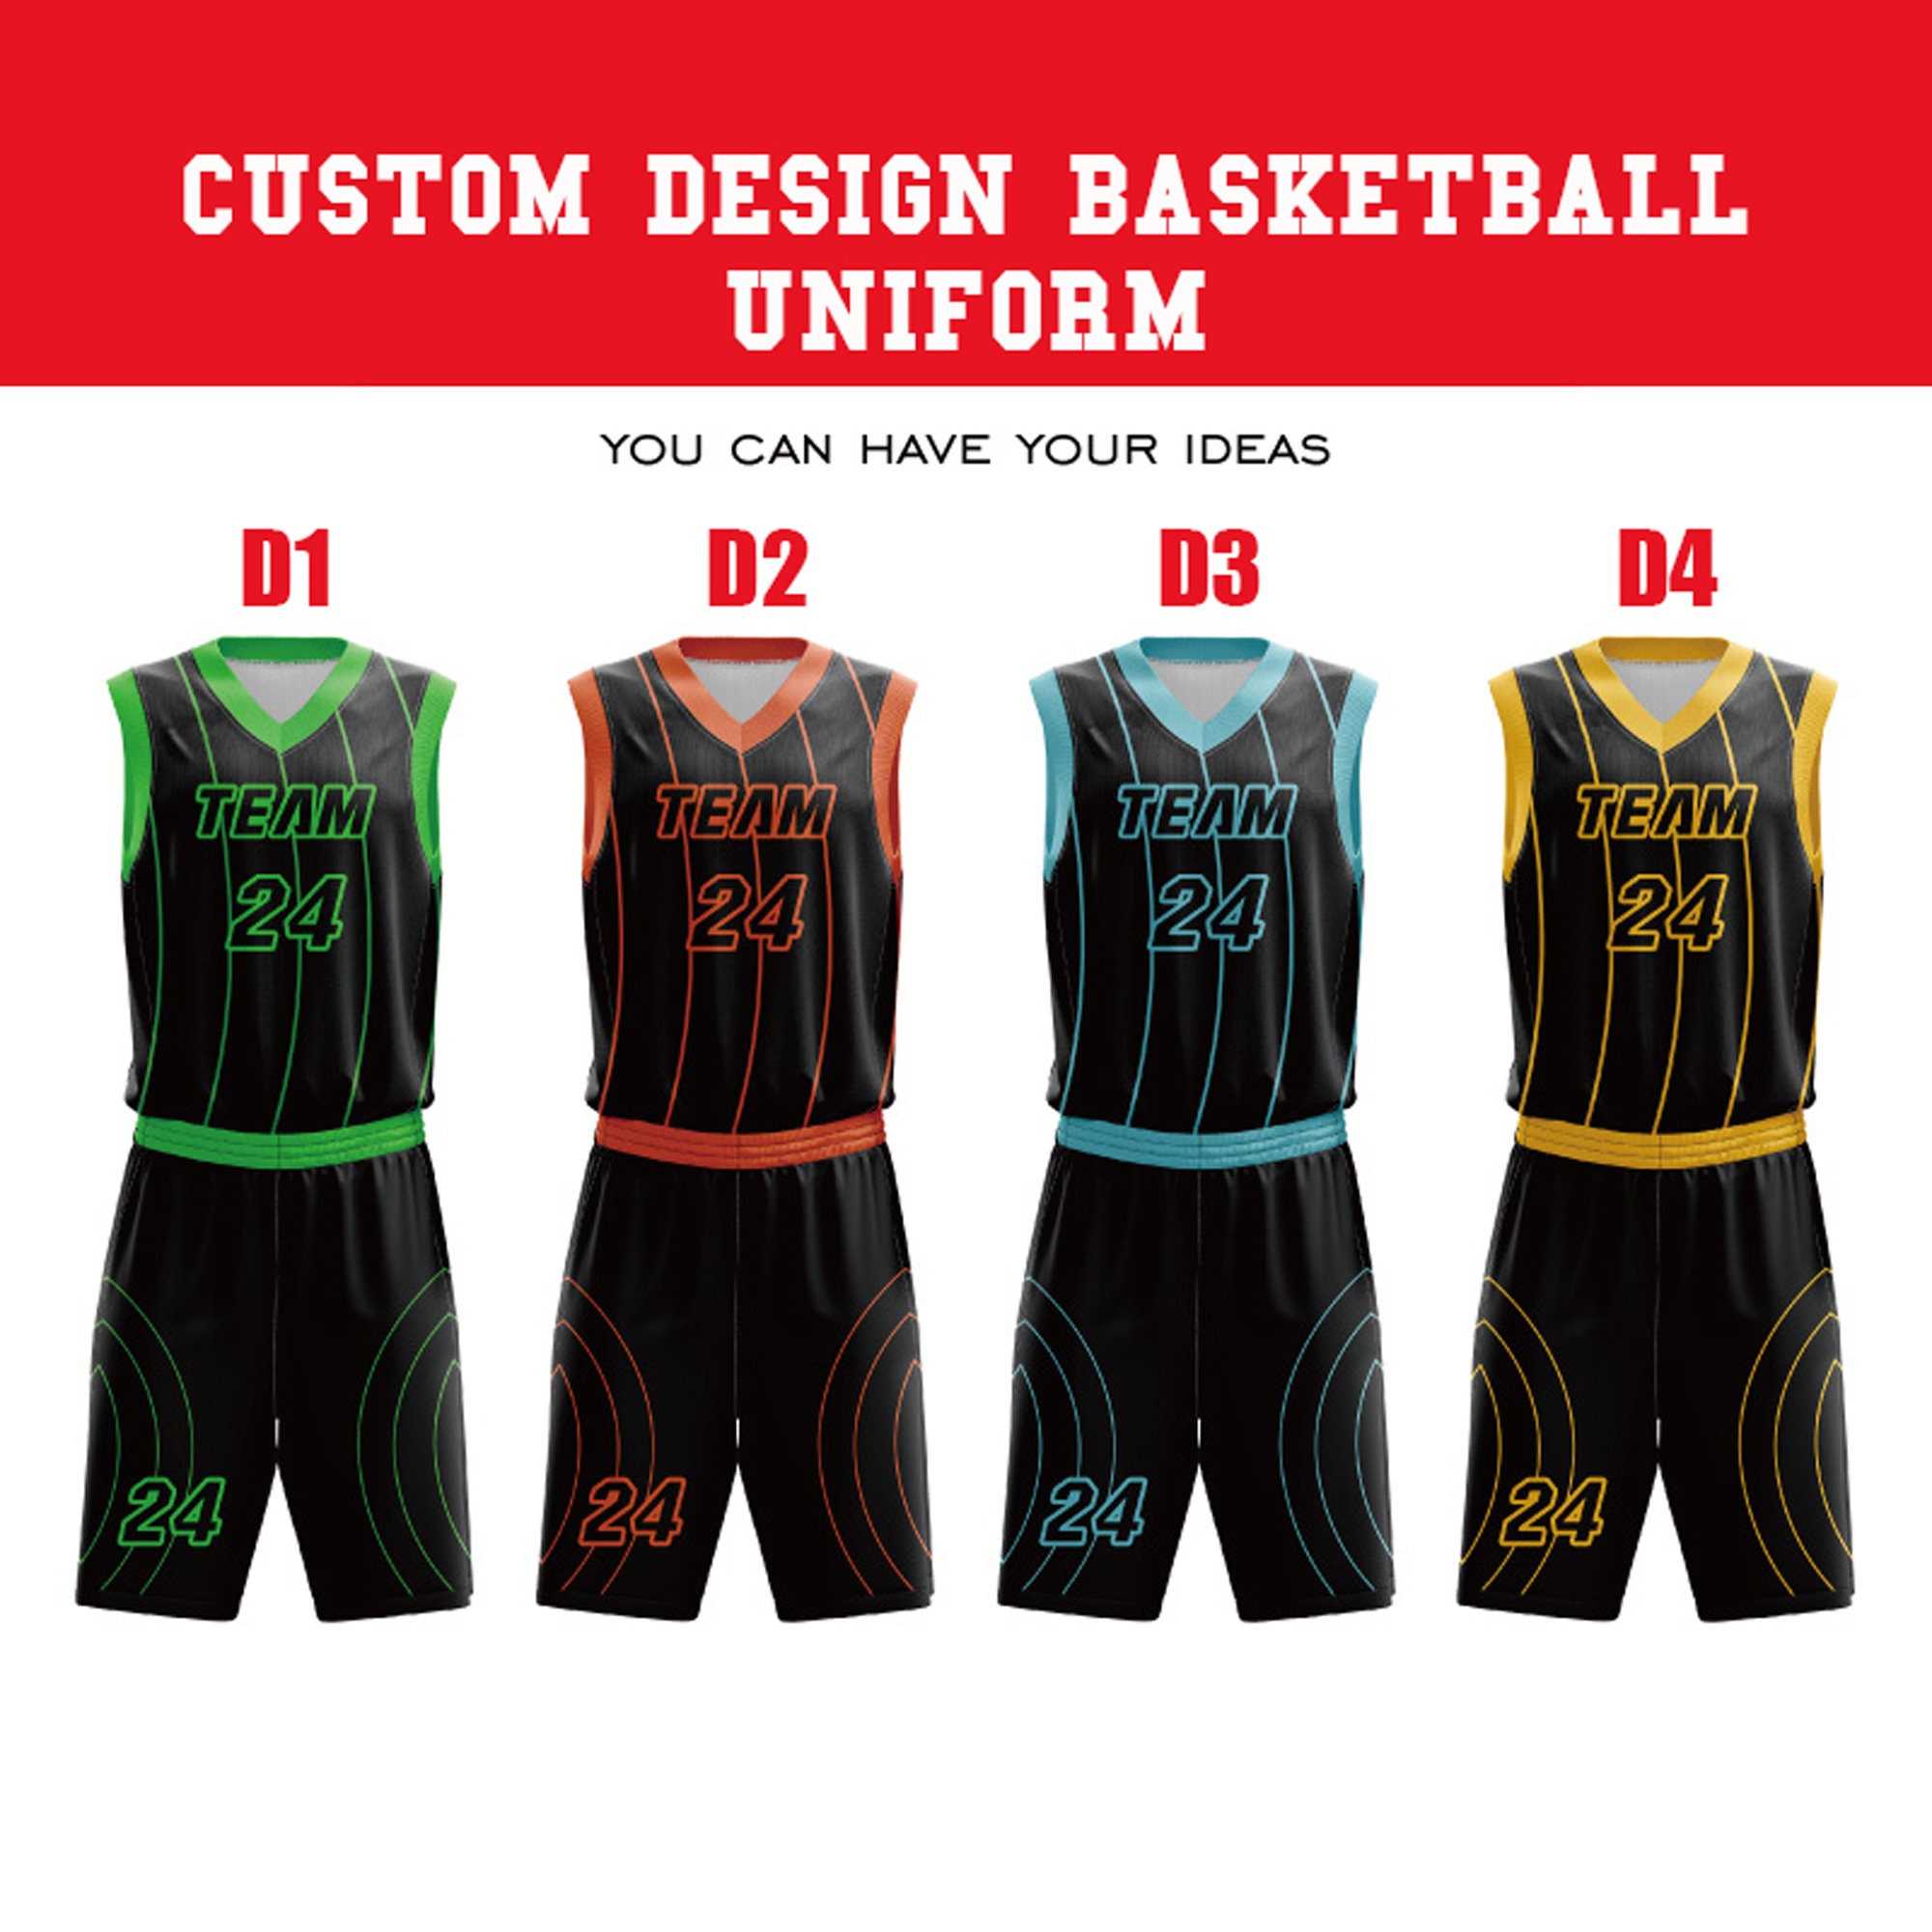 Sublimation basketball uniforms for KSA client. Created by Team